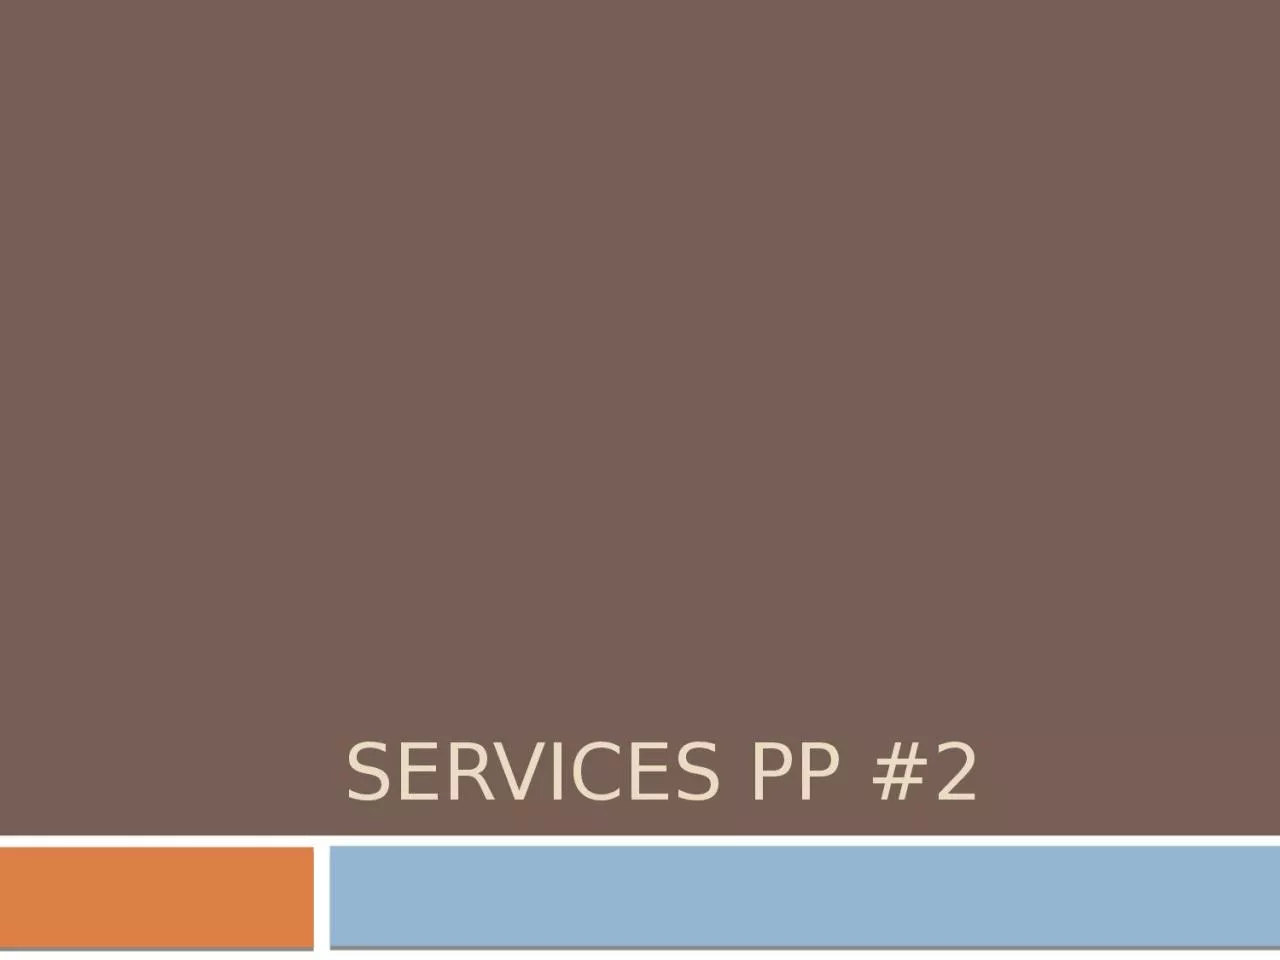 Services PP #2 Why are consumer services distributed in a regular pattern?